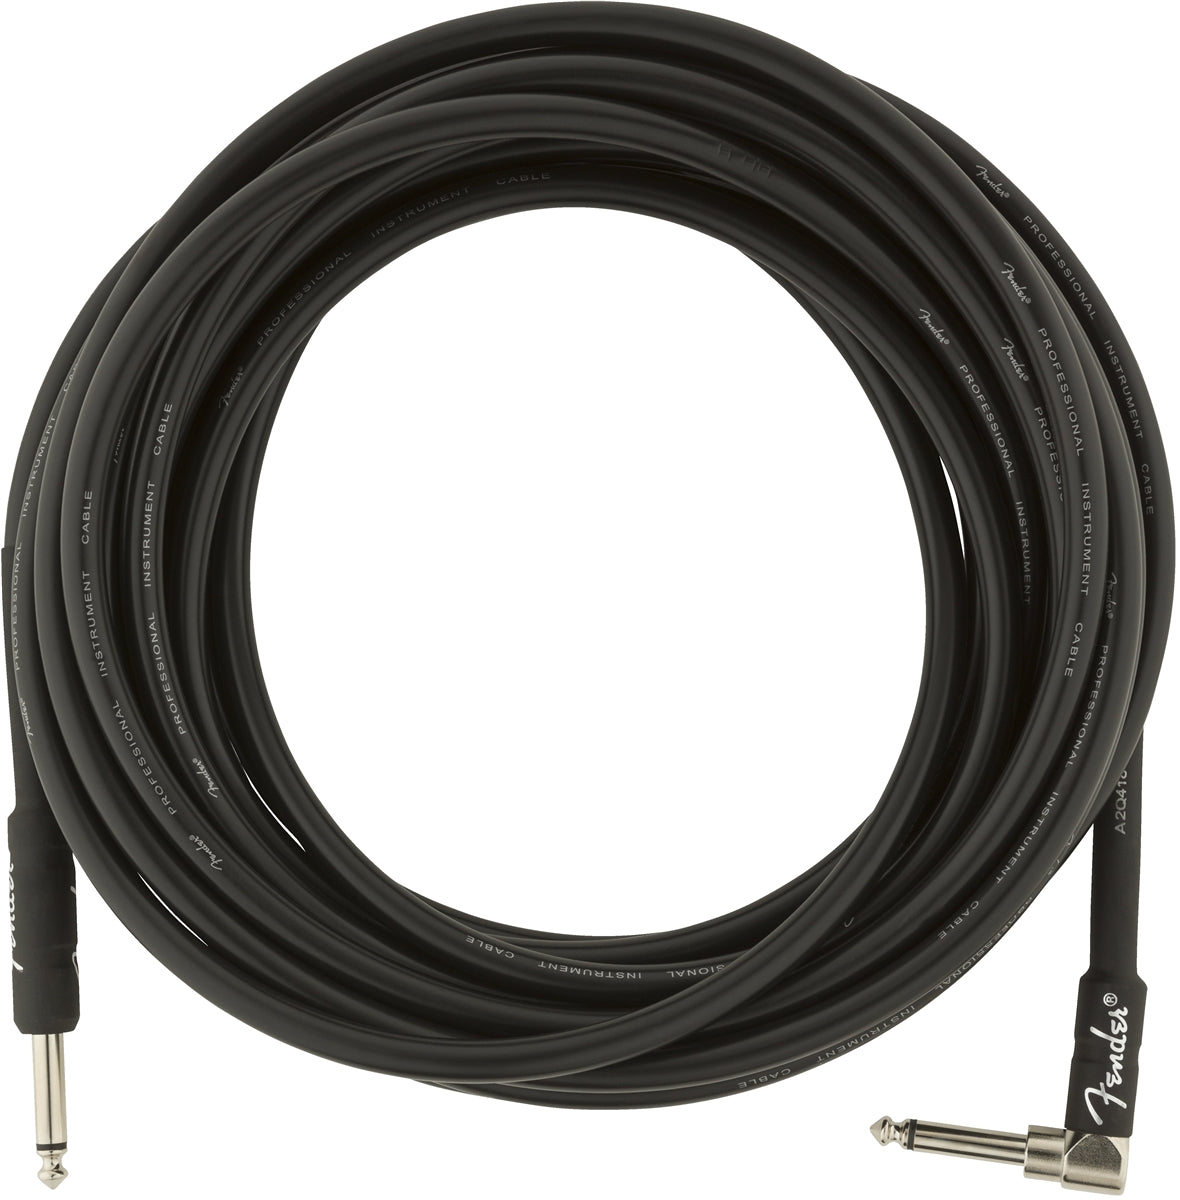 Fender Professional Series 25' Straight to Right Angle Instrument Cable - Black